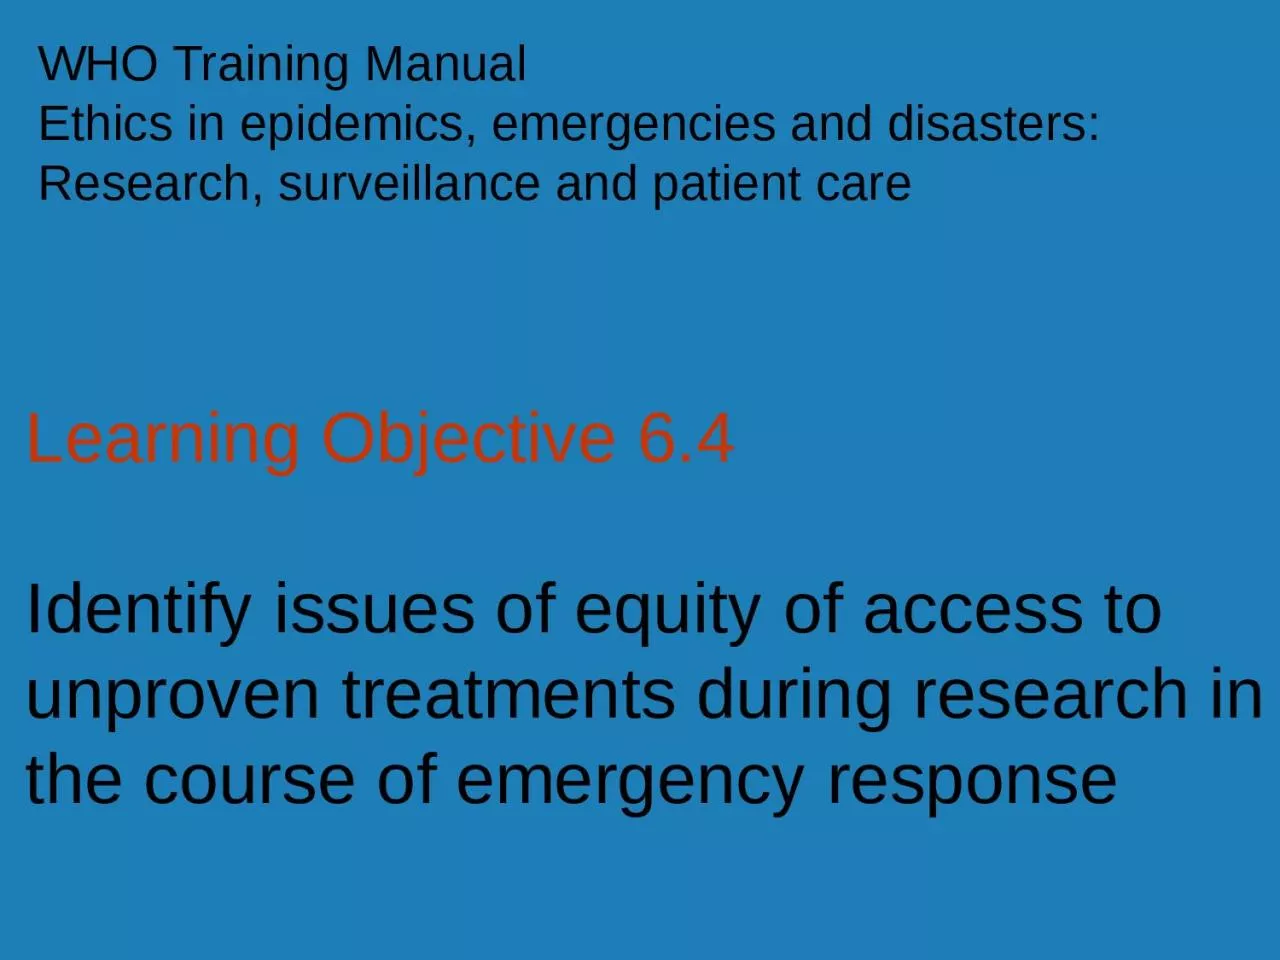 Learning Objective 6.4 Identify issues of equity of access to unproven treatments during